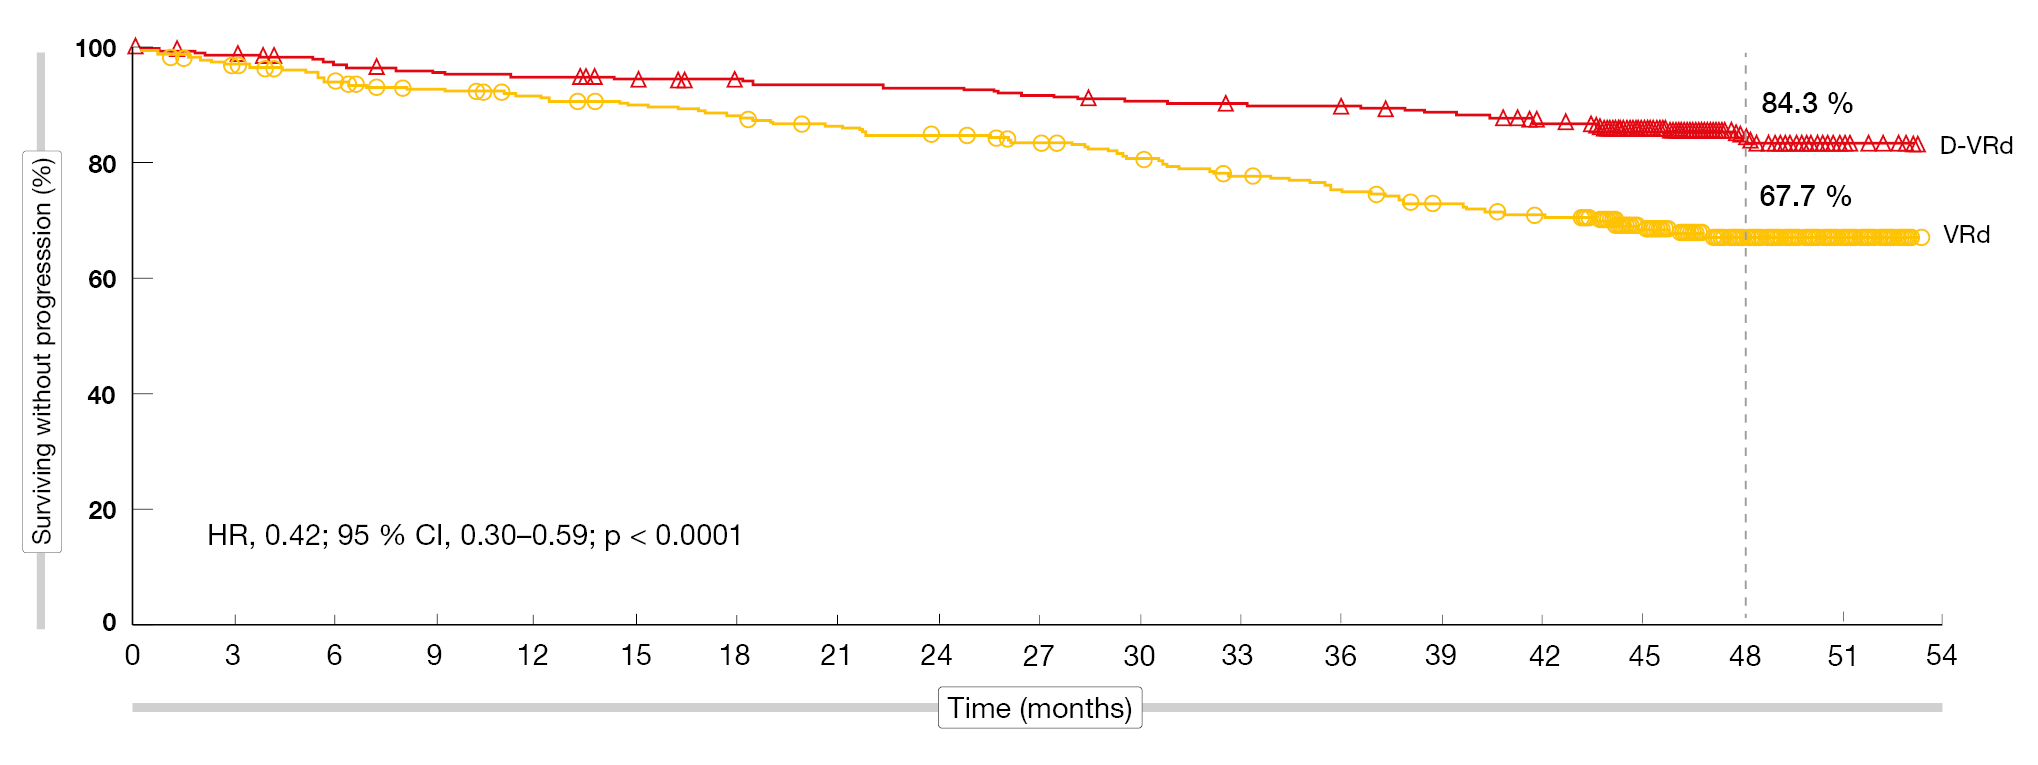 Figure 1: Progression-free survival benefit with D-VRd vs. VRd in transplant-eligible patients